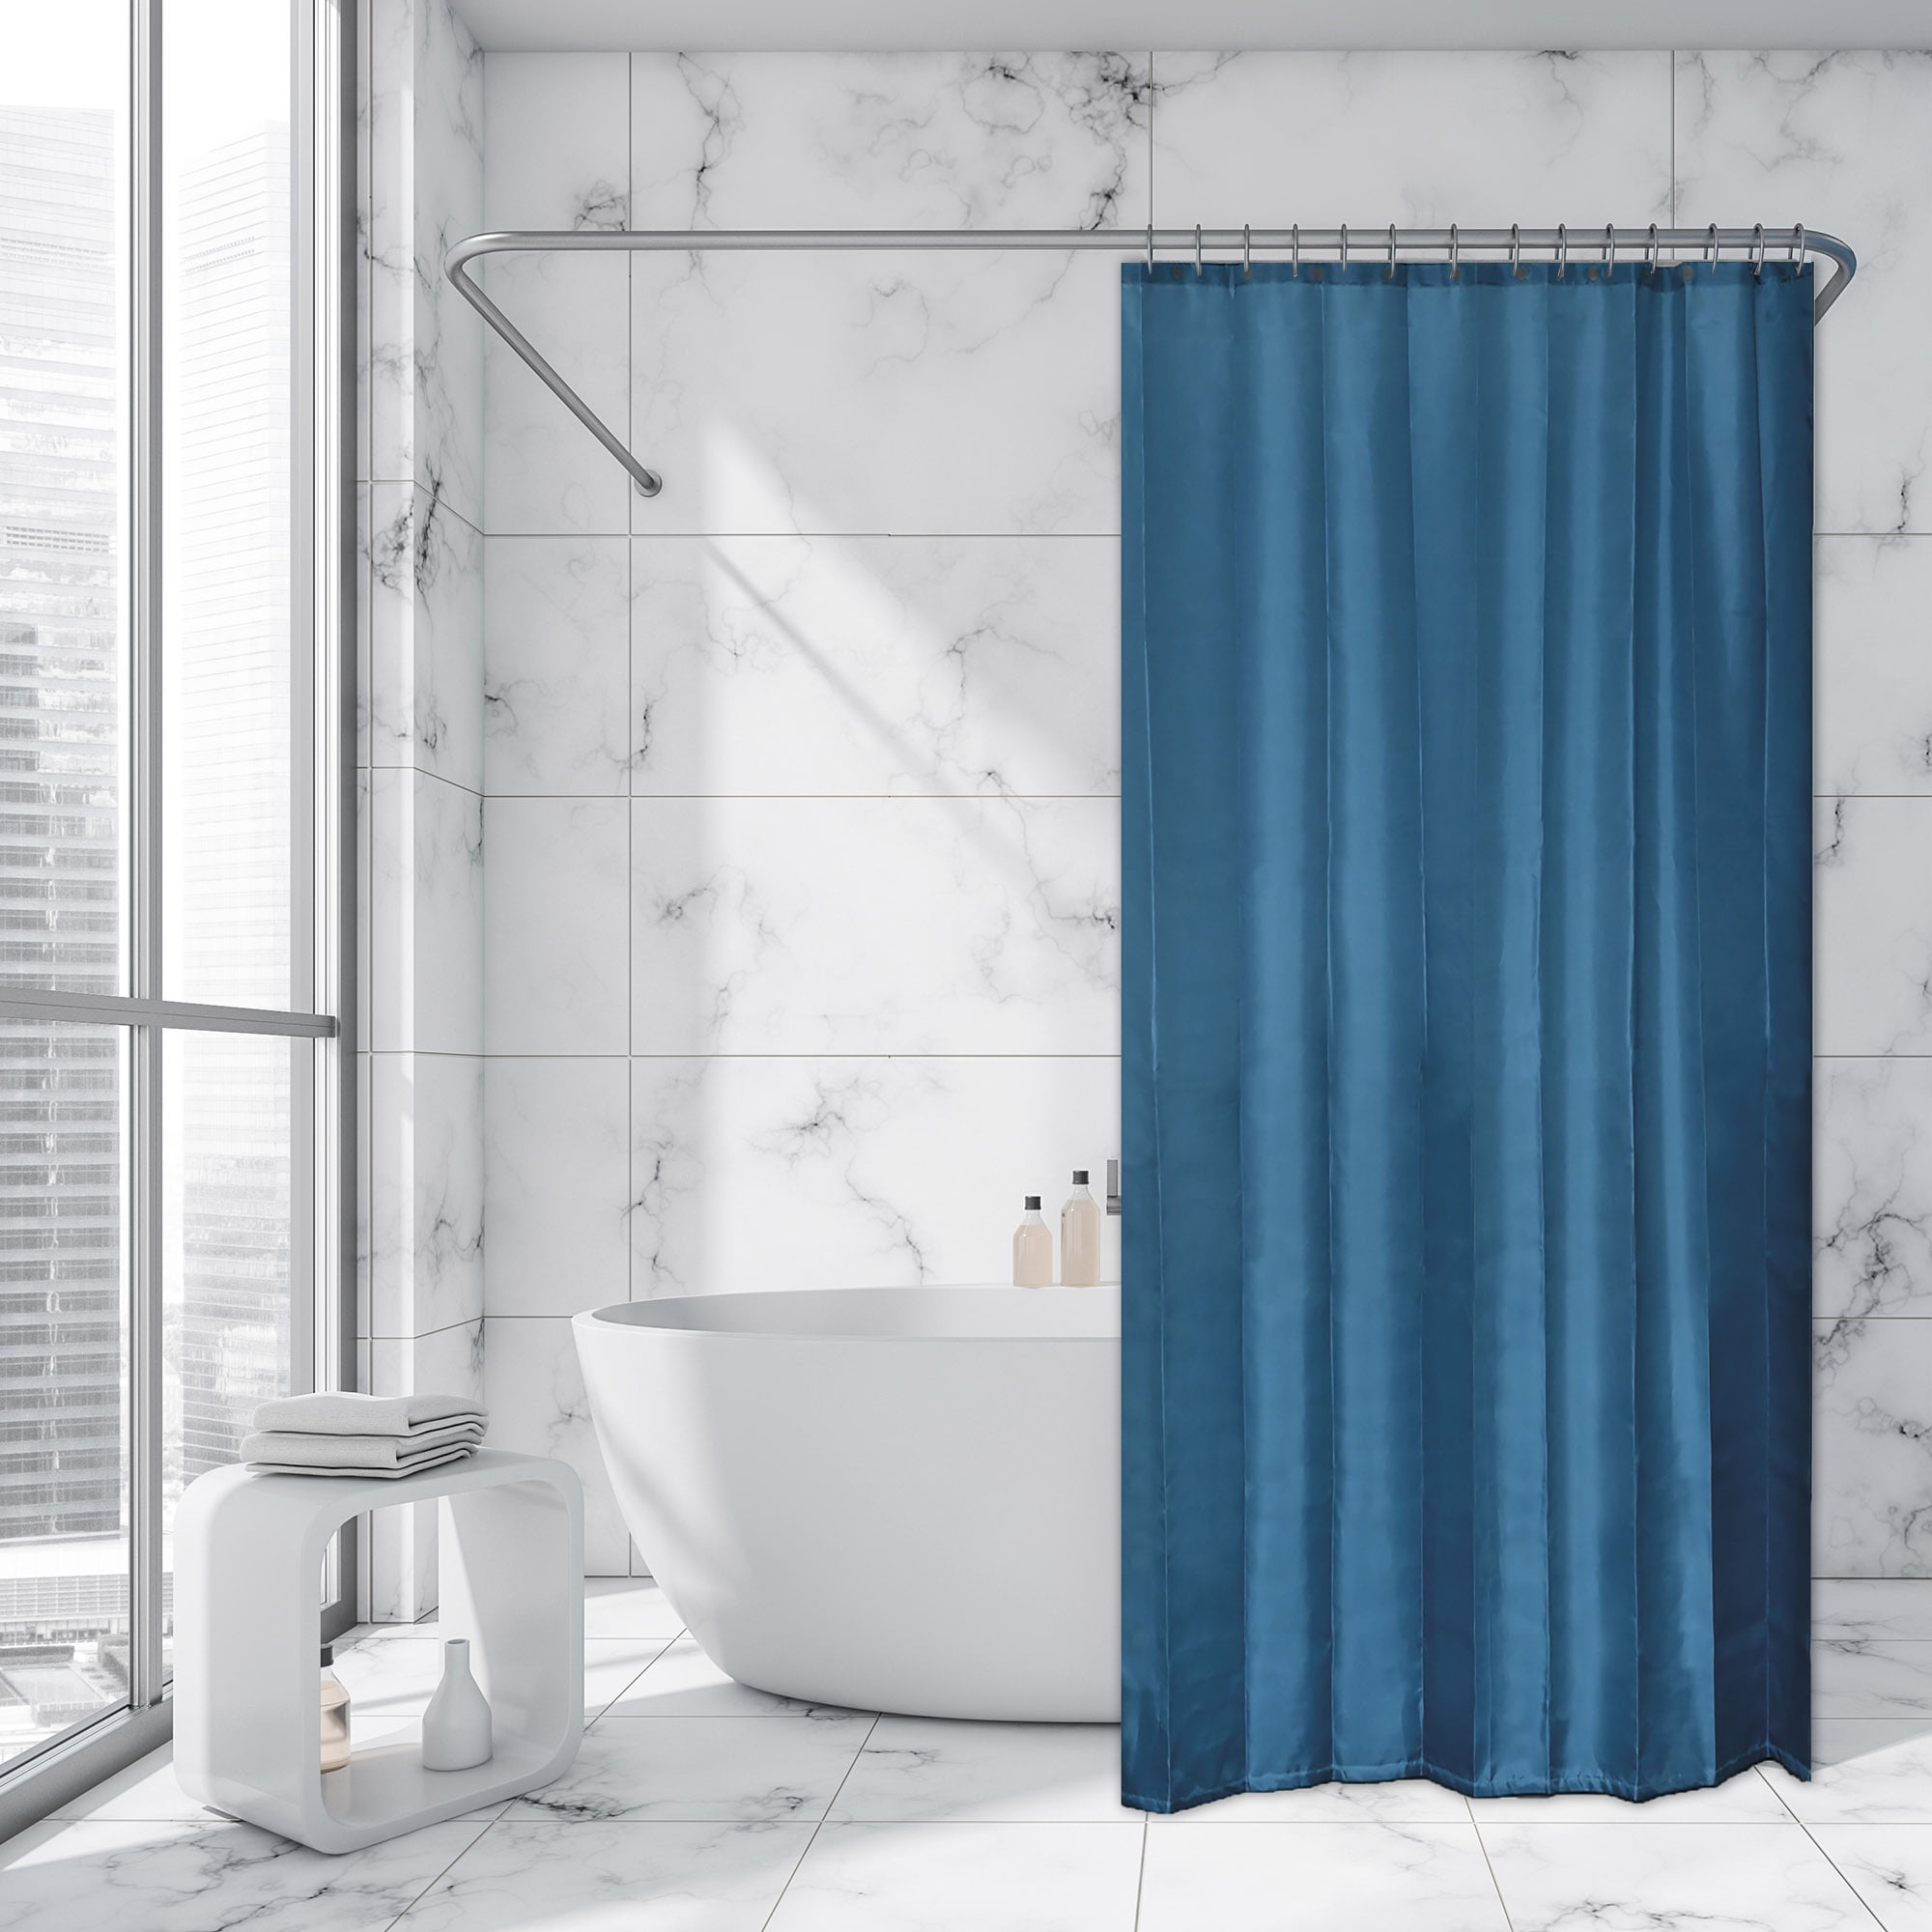 Music and sound Bathroom Shower Curtain Waterproof Fabric w/12 Hooks 71*71in 